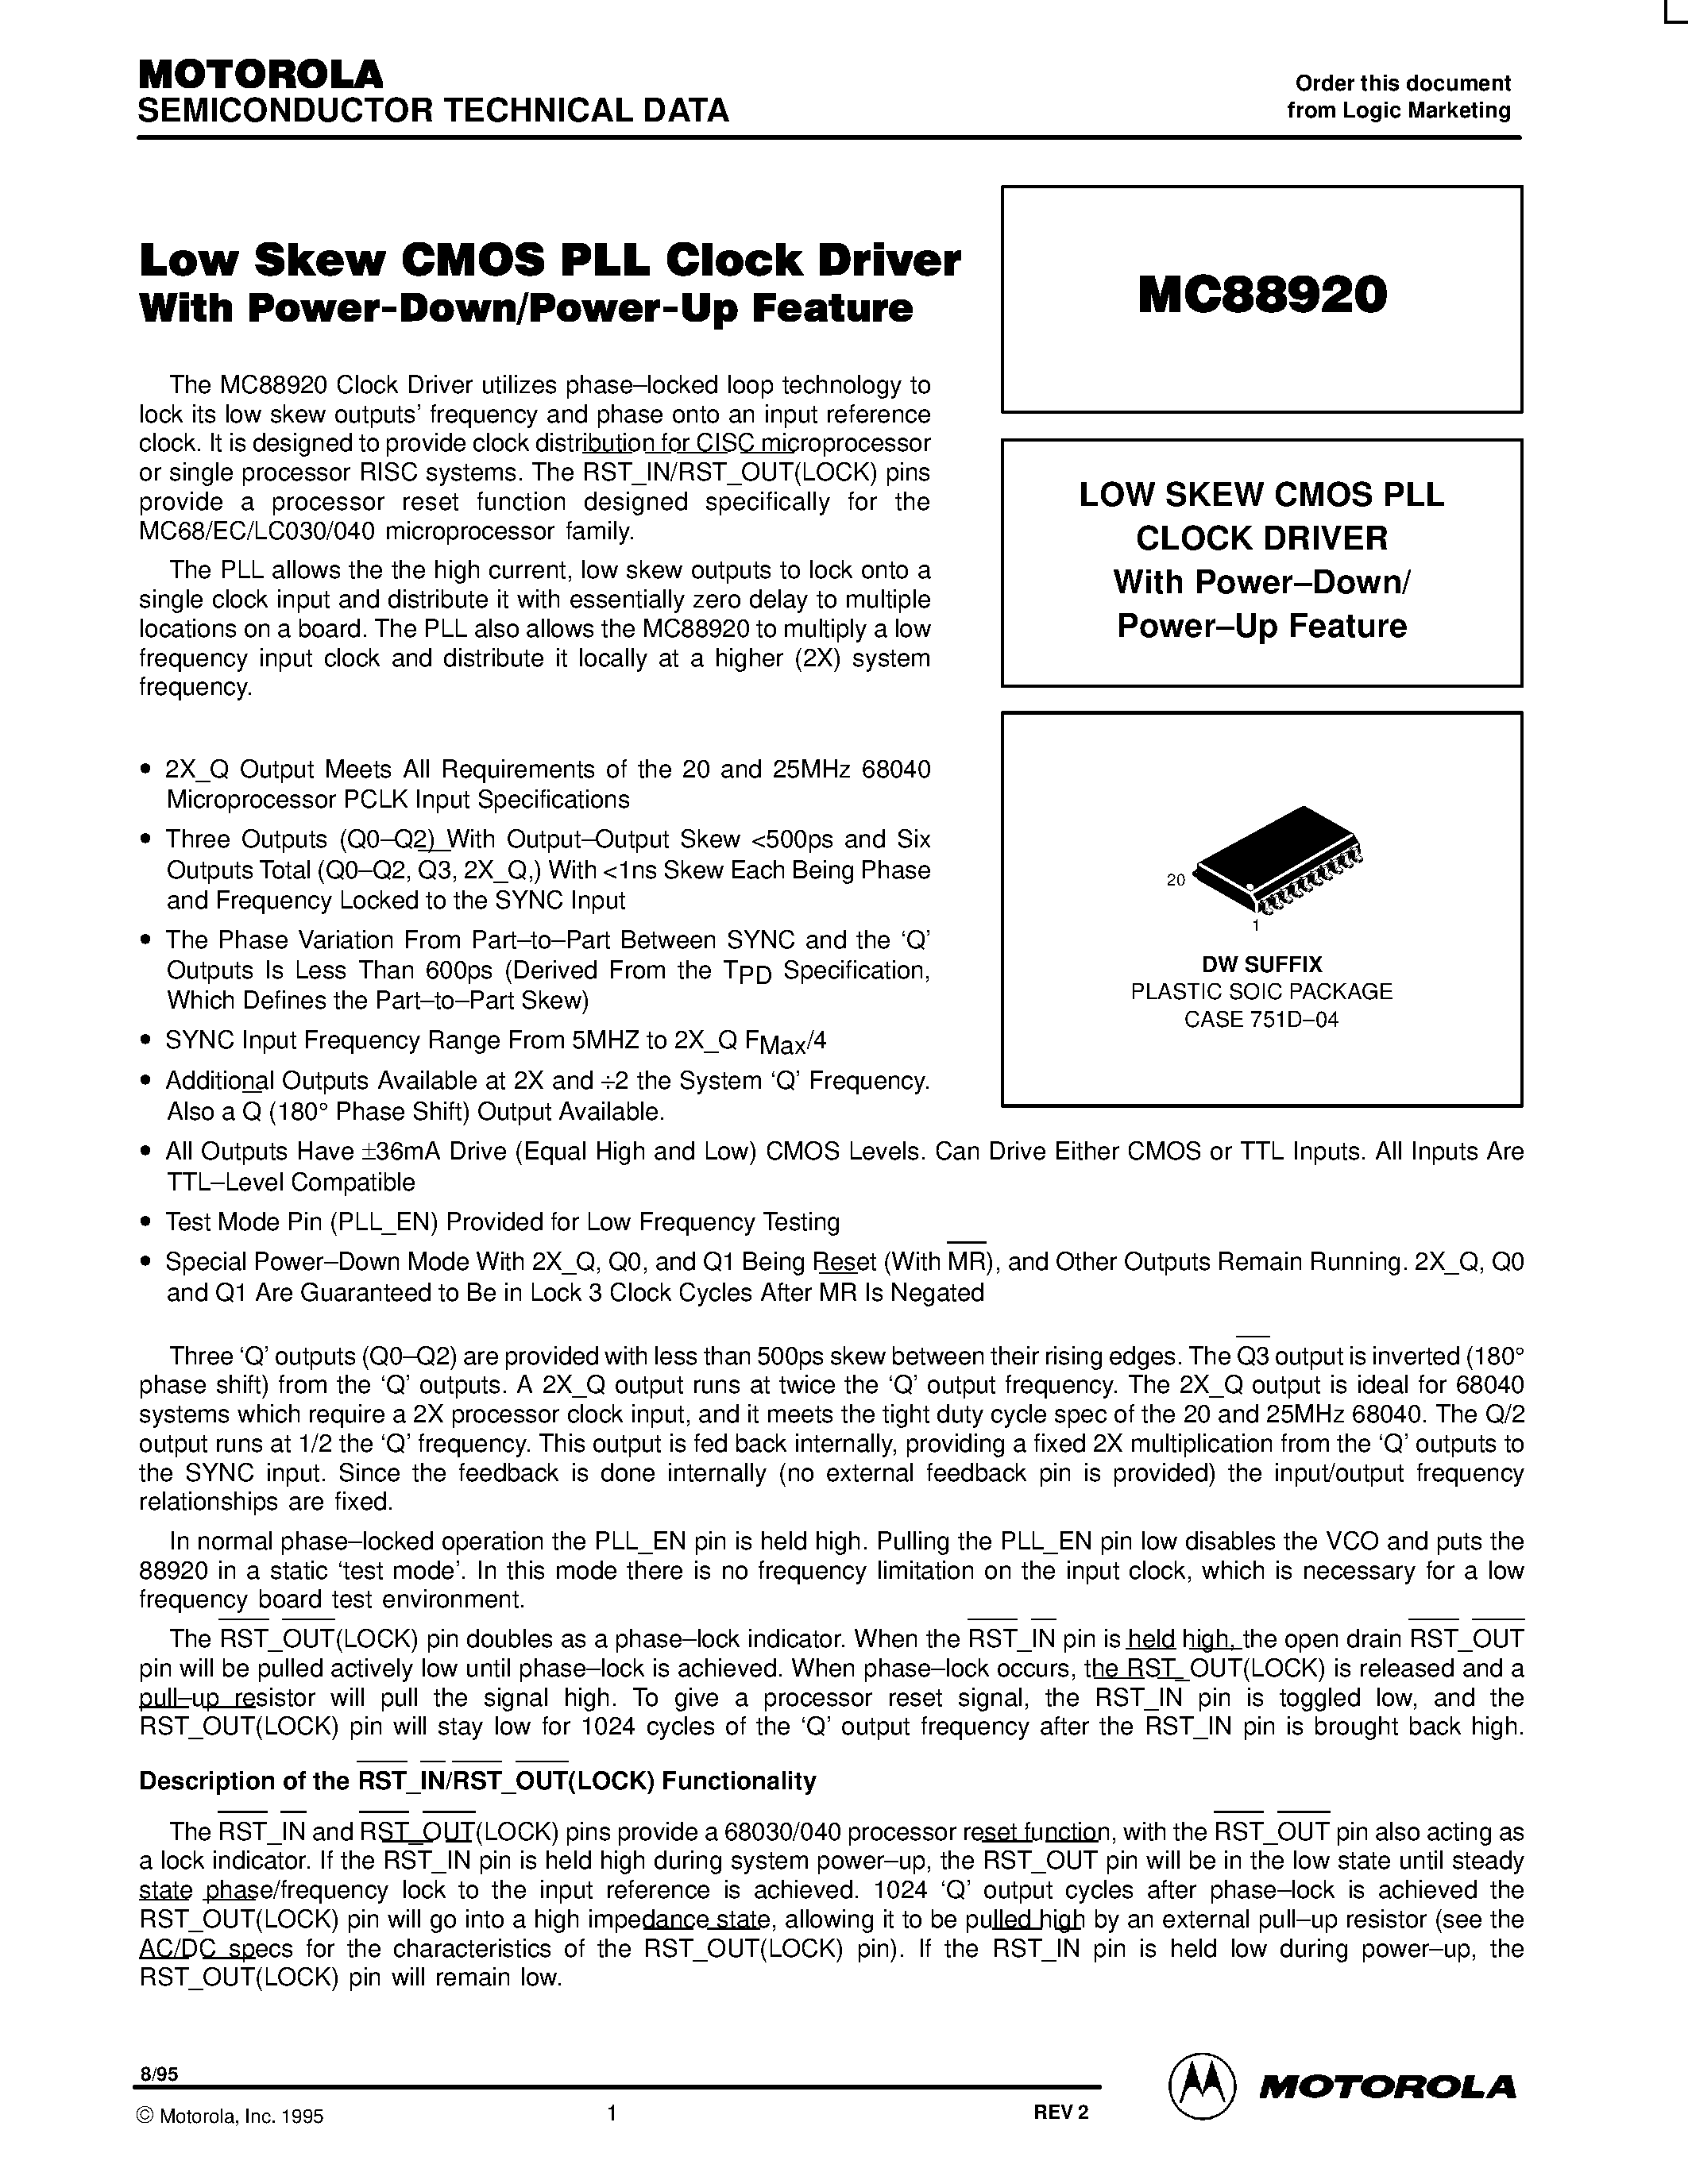 Datasheet MC88920DW - LOW SKEW CMOS PLL CLOCK DRIVER With Power-Down/ Power-Up Feature page 1